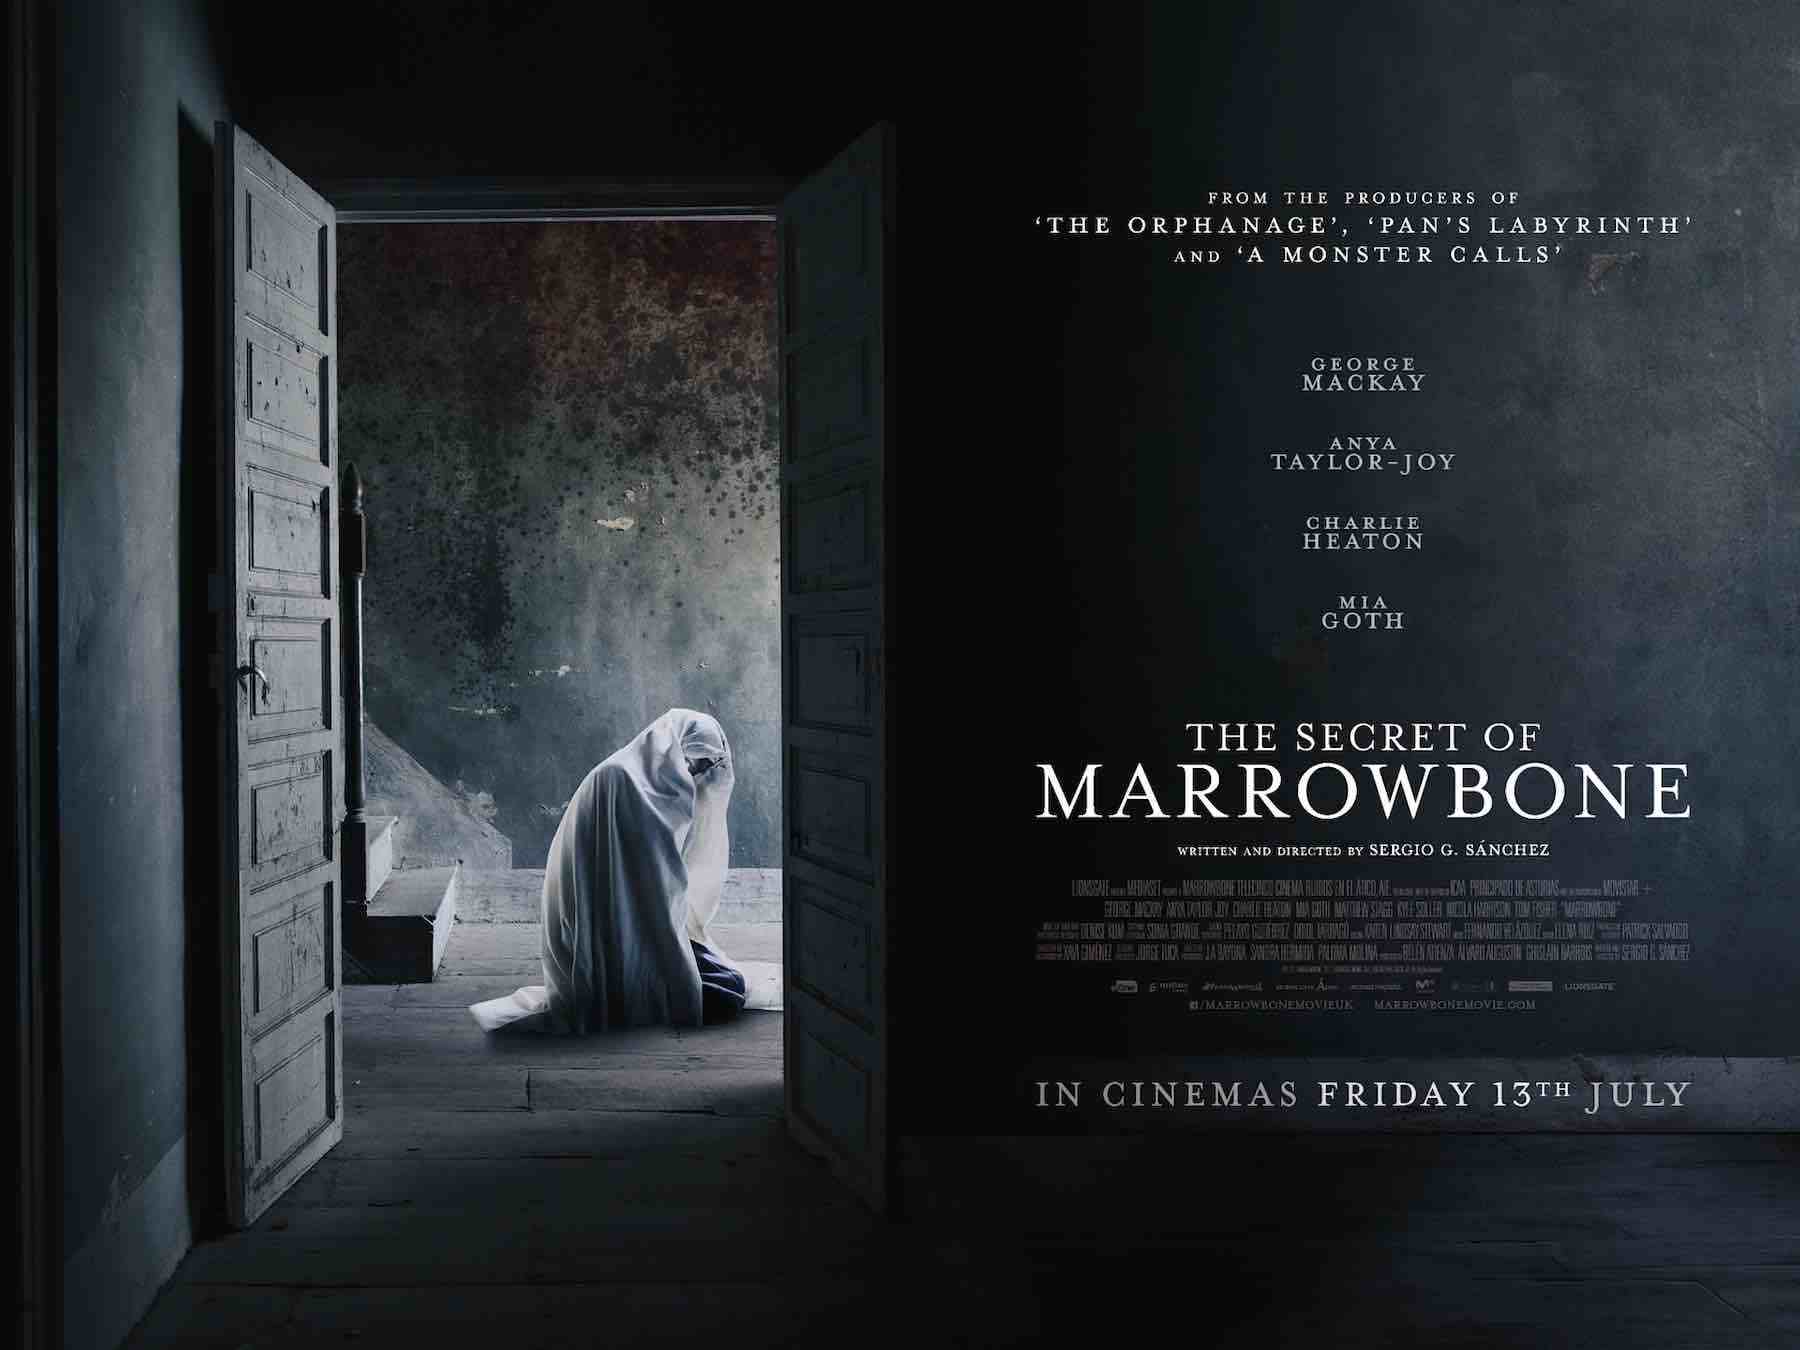 The Secret Of Marrowbone film review: a family chiller from the writer of The Orphanage